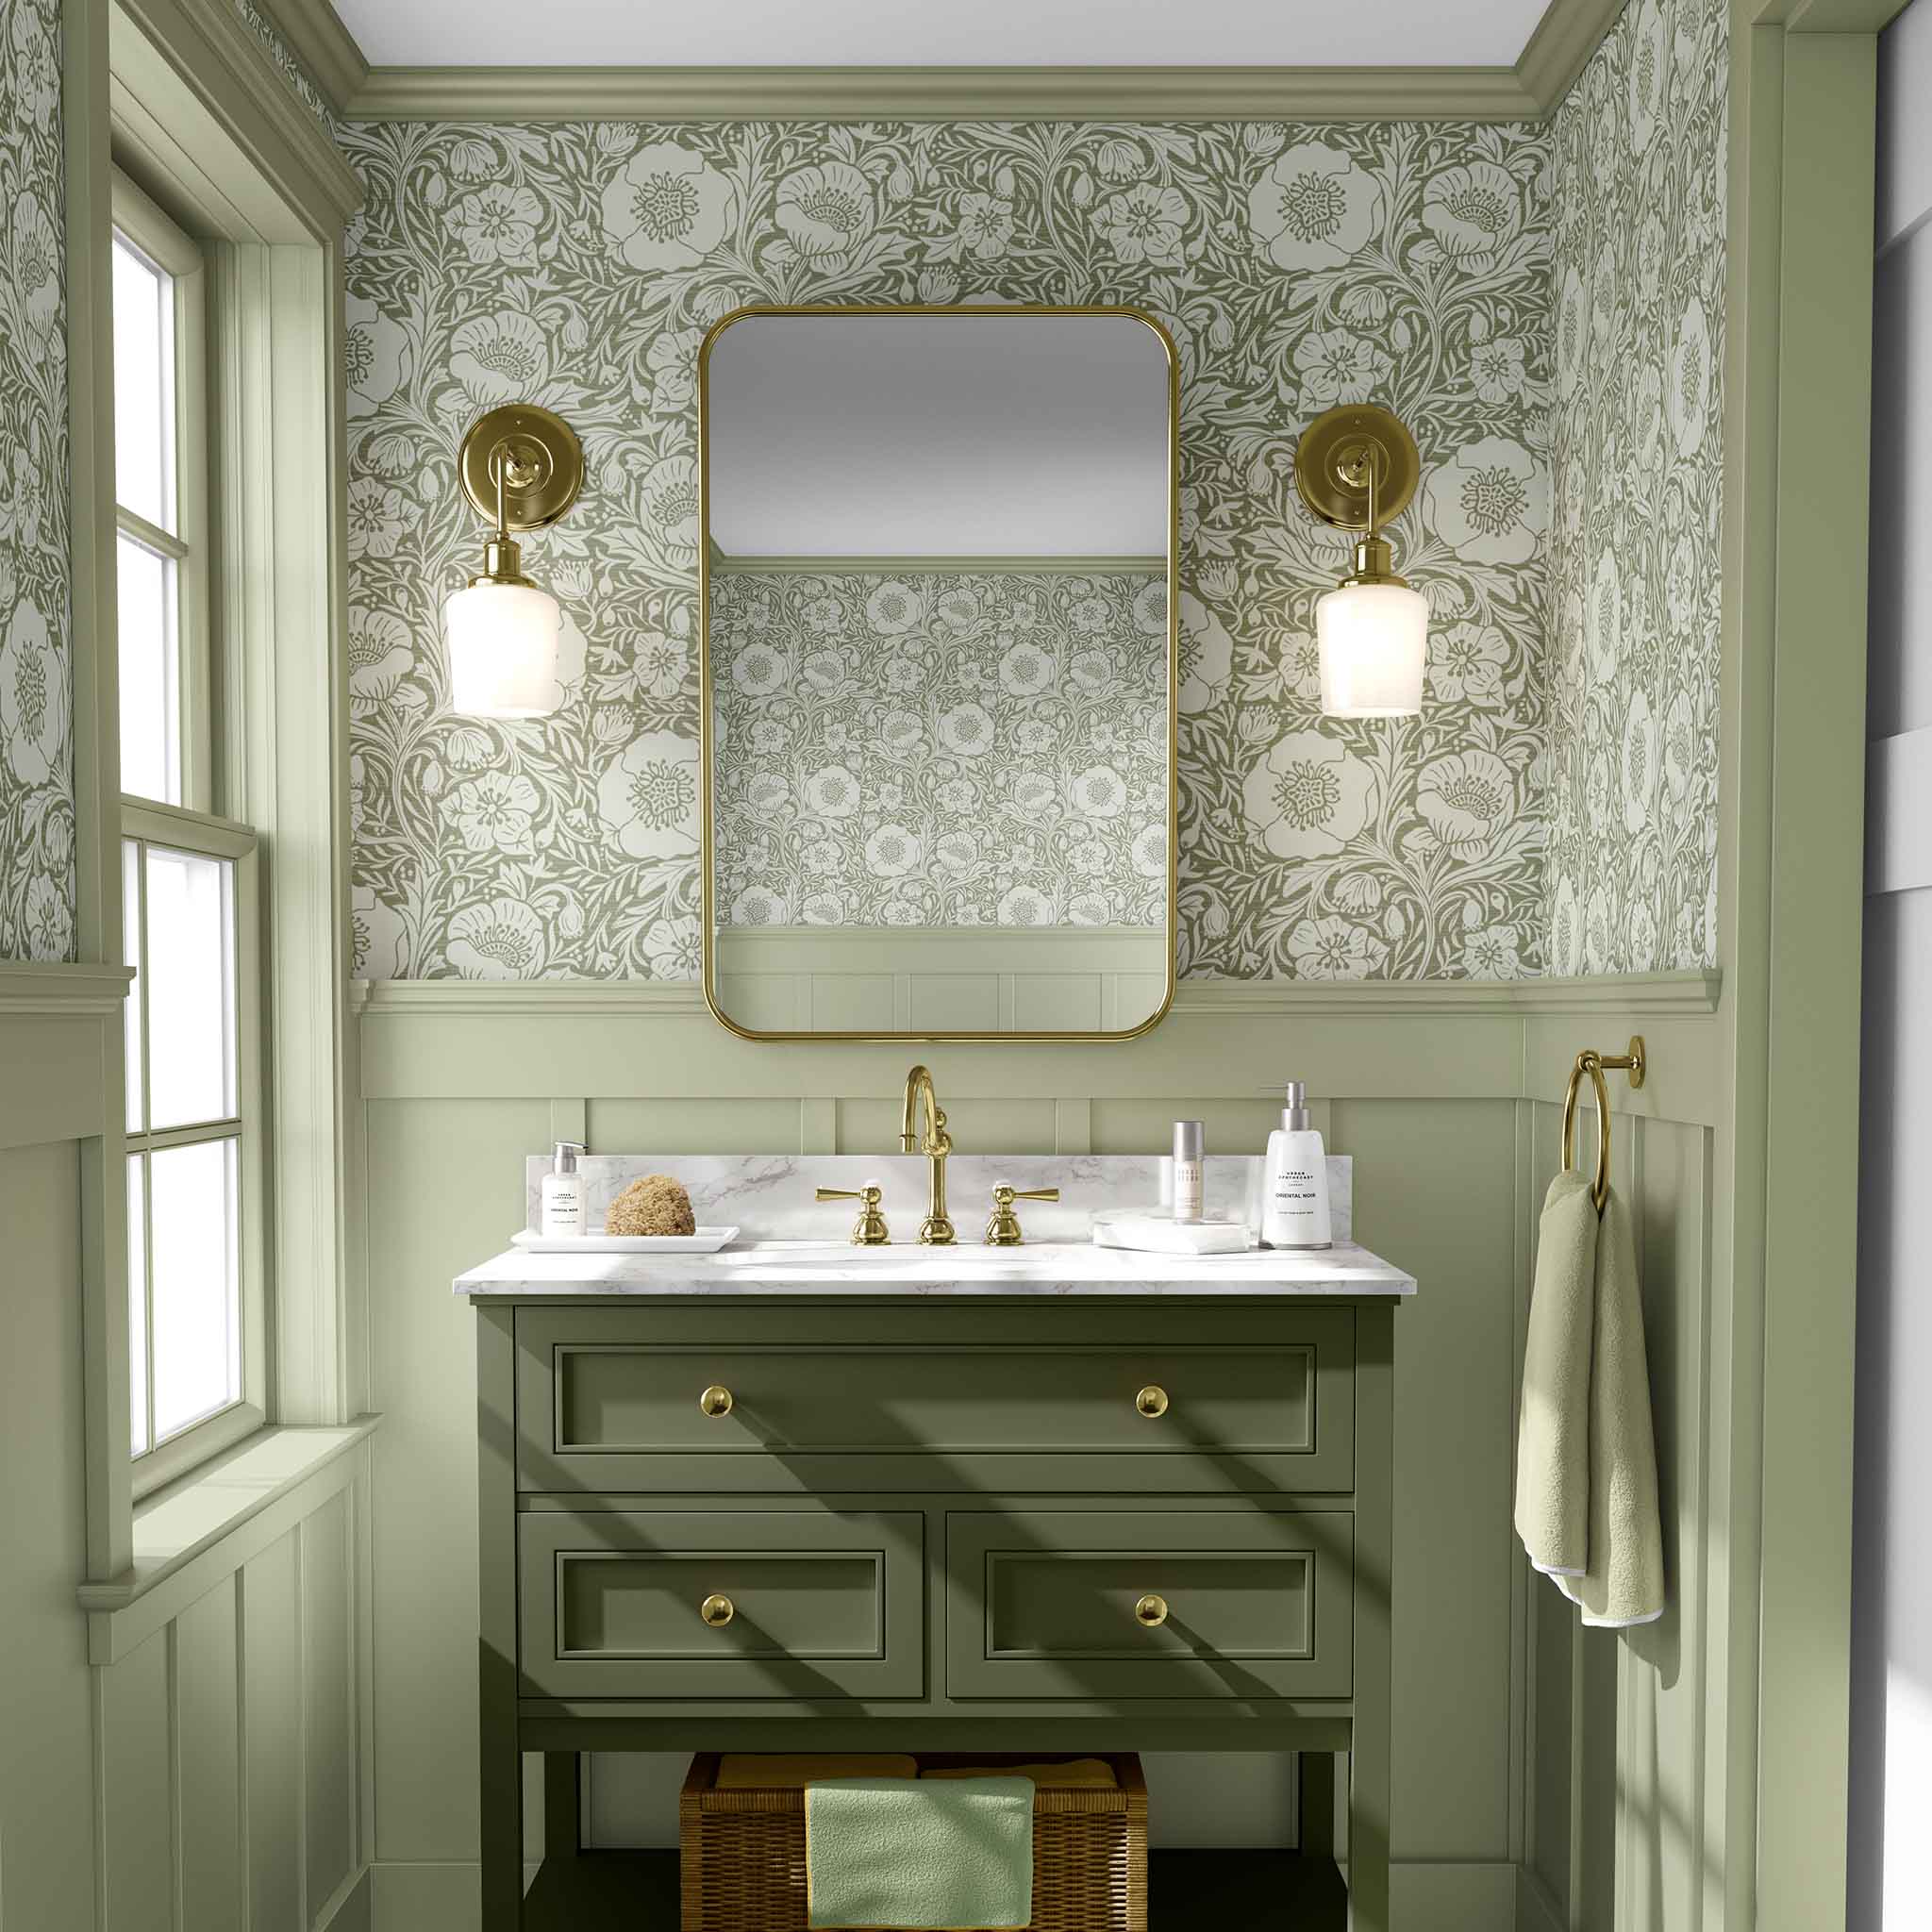 Sage Green Poppy Pattern Pre-Pasted Removable Wallpaper is the best choice for a bathroom